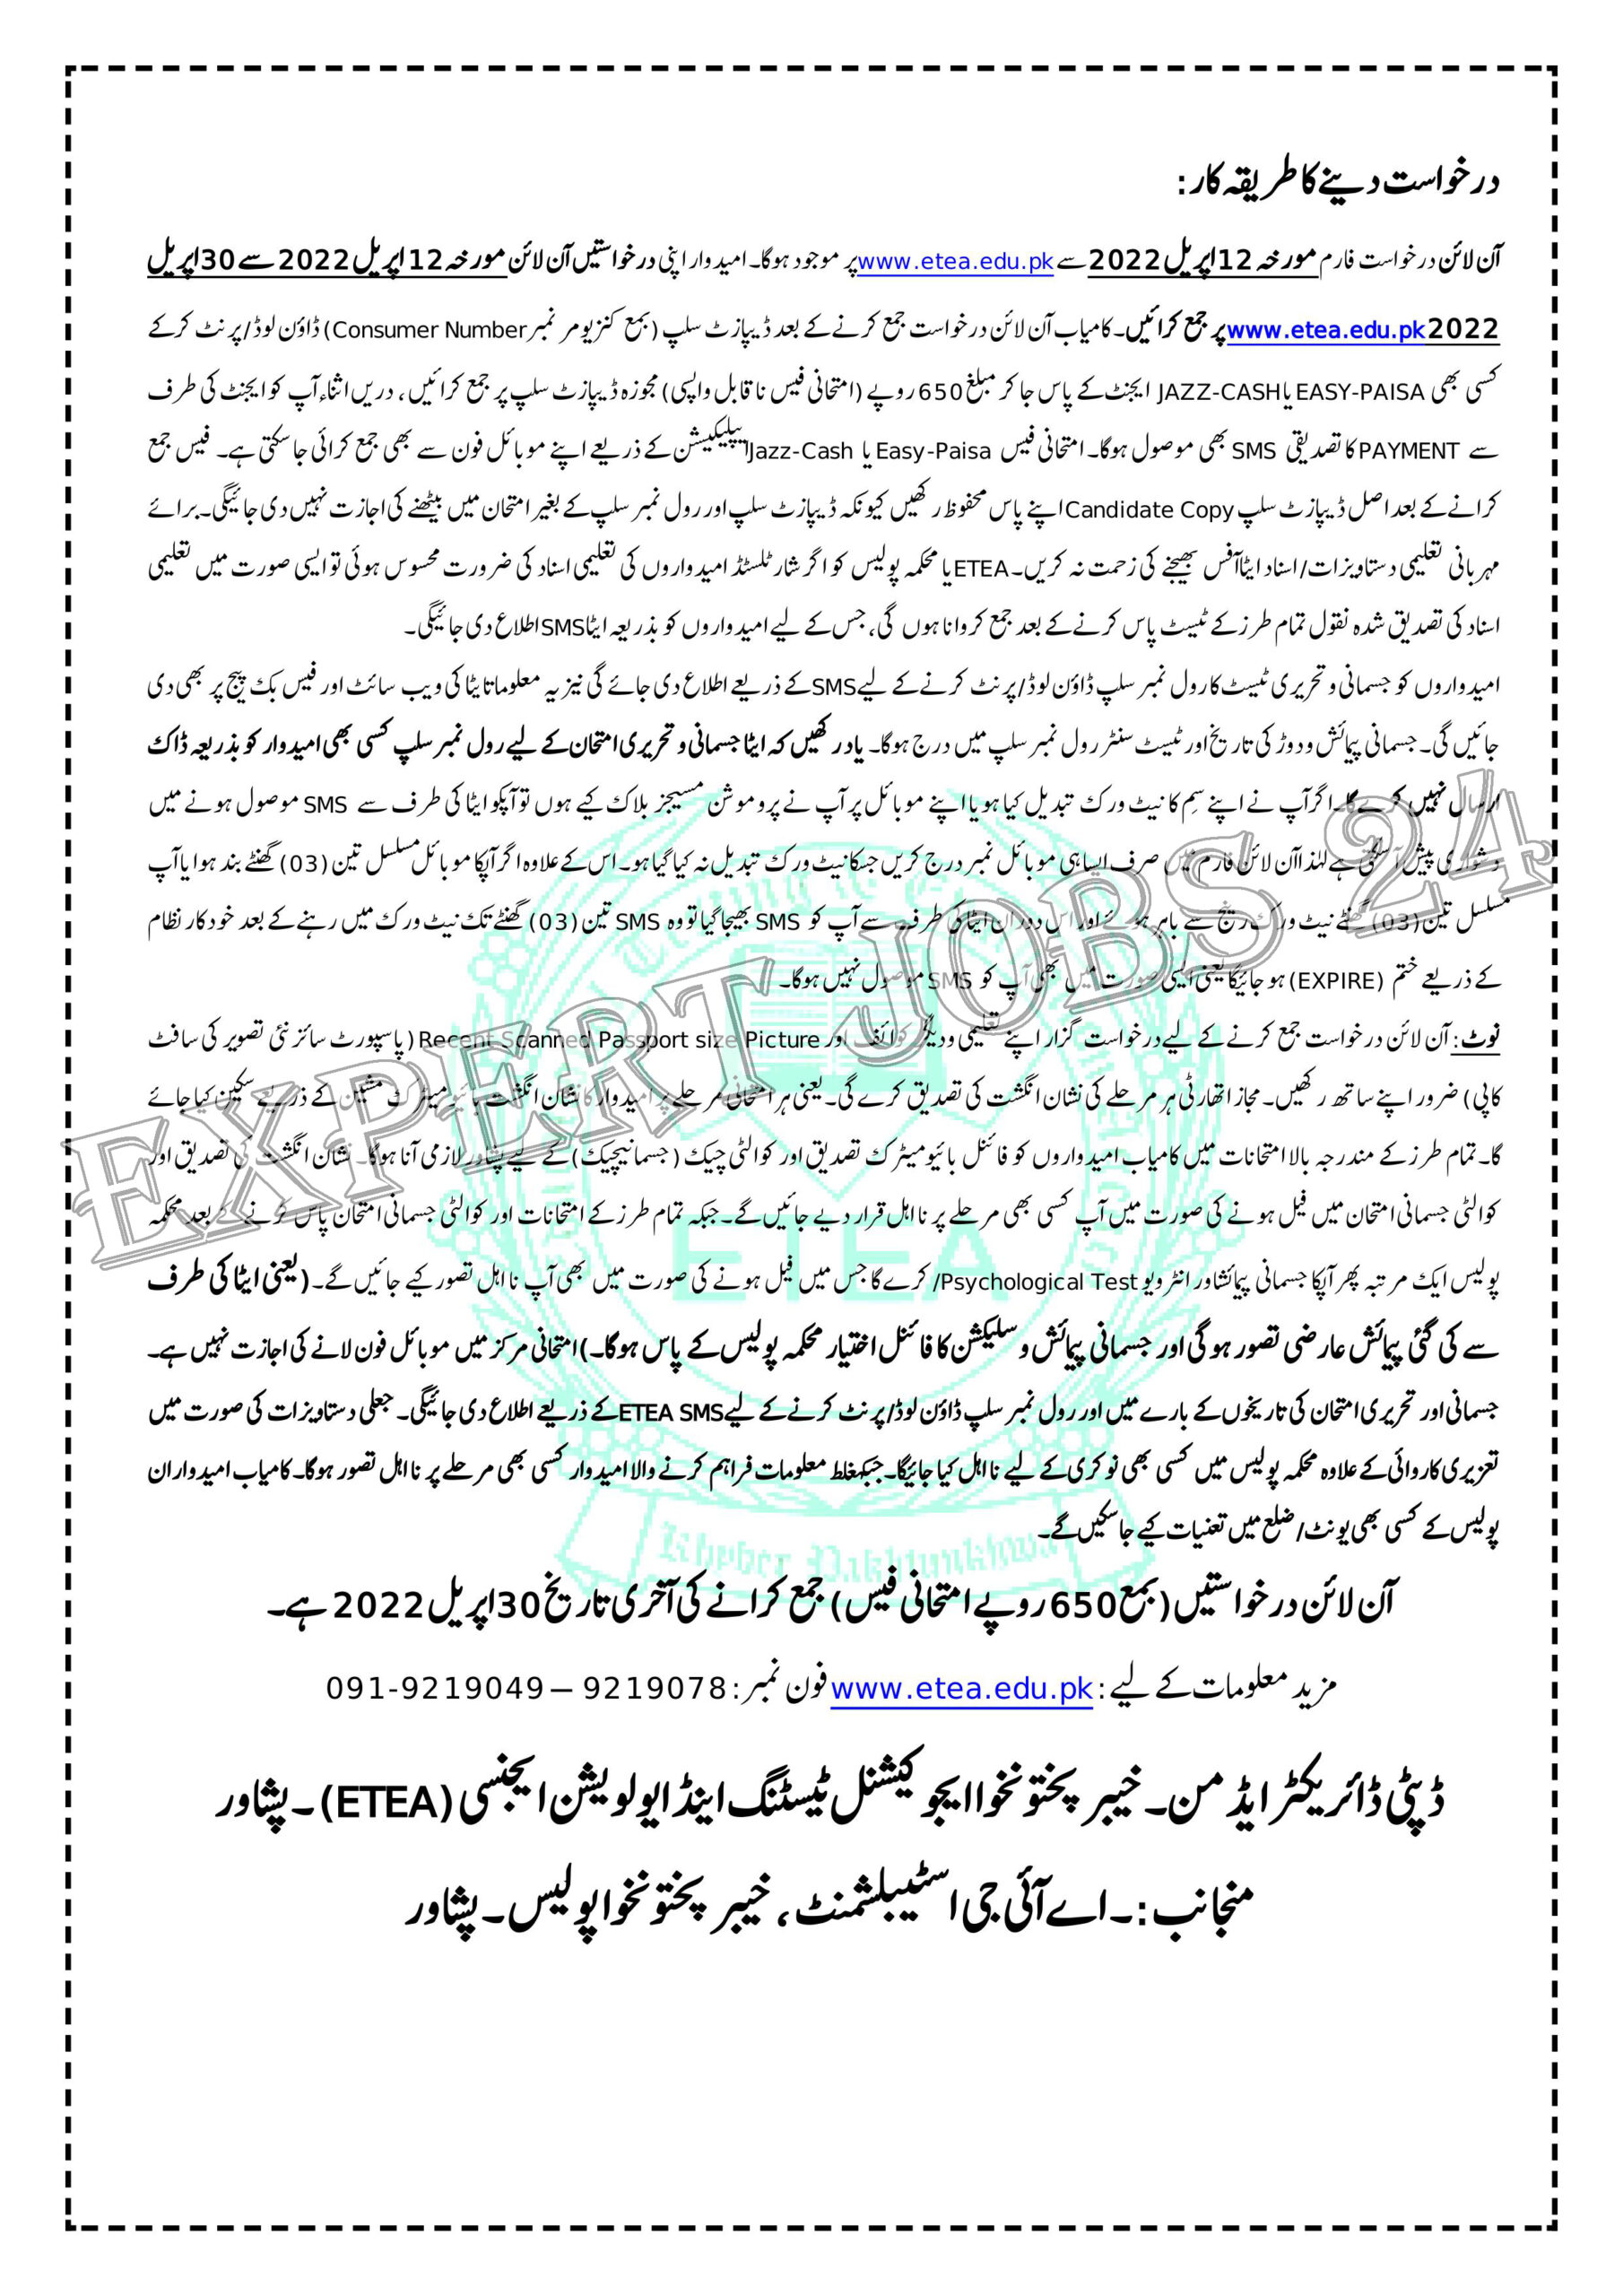 Police 6948 Jobs For Males & Females